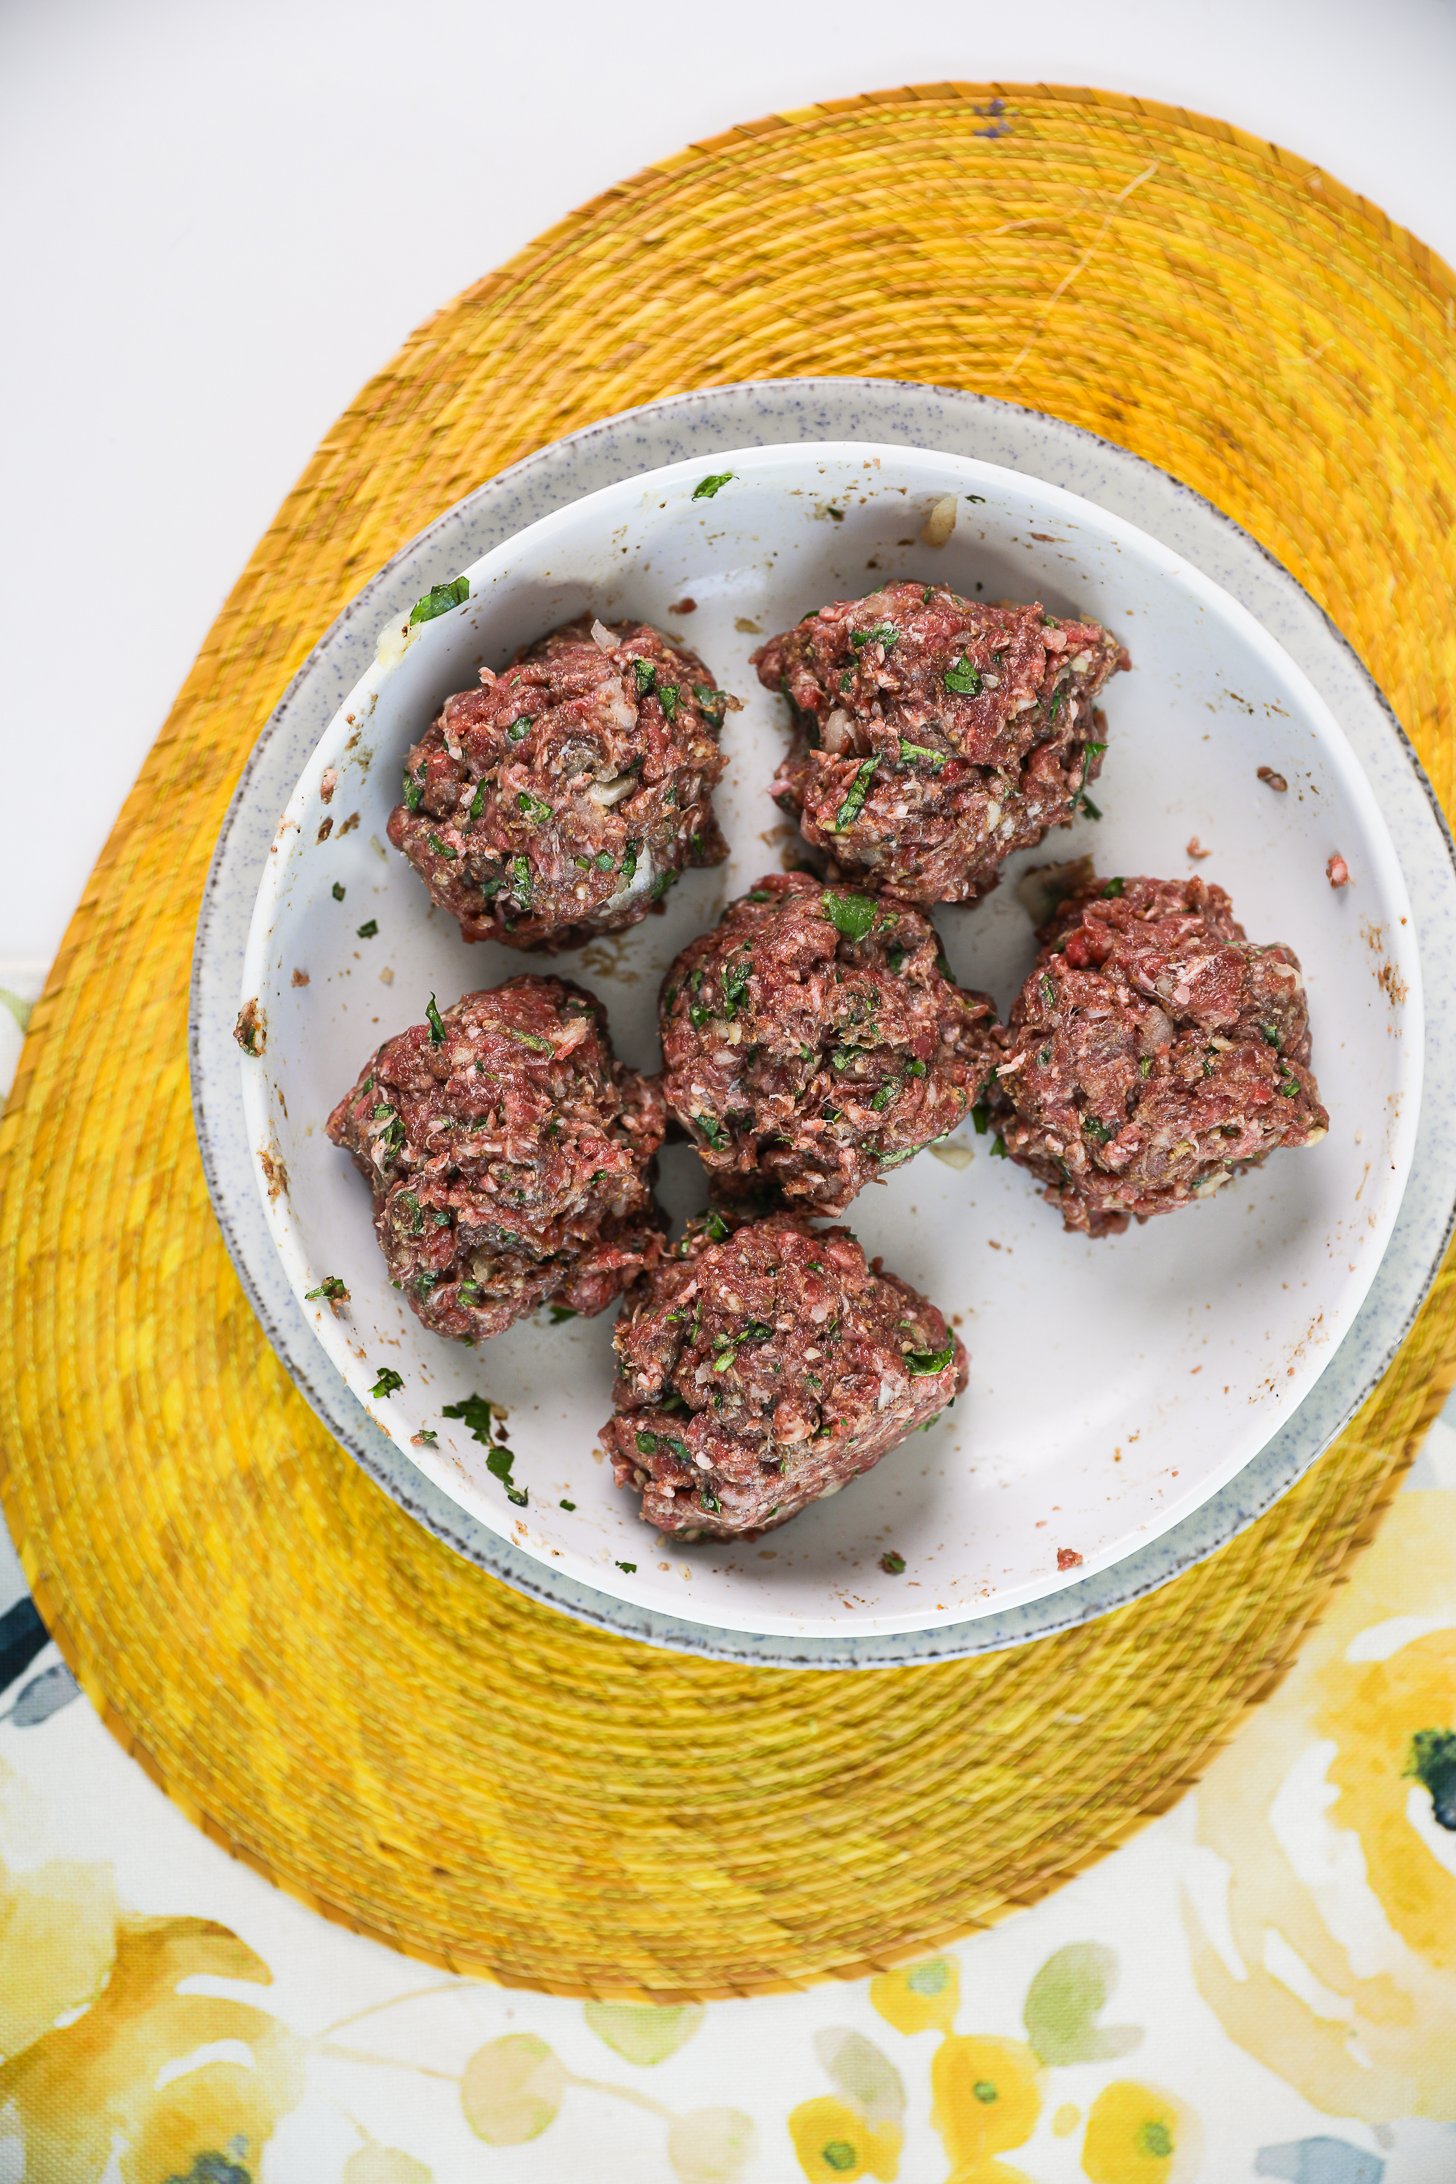 Six balls of raw mince beef in a bowl.